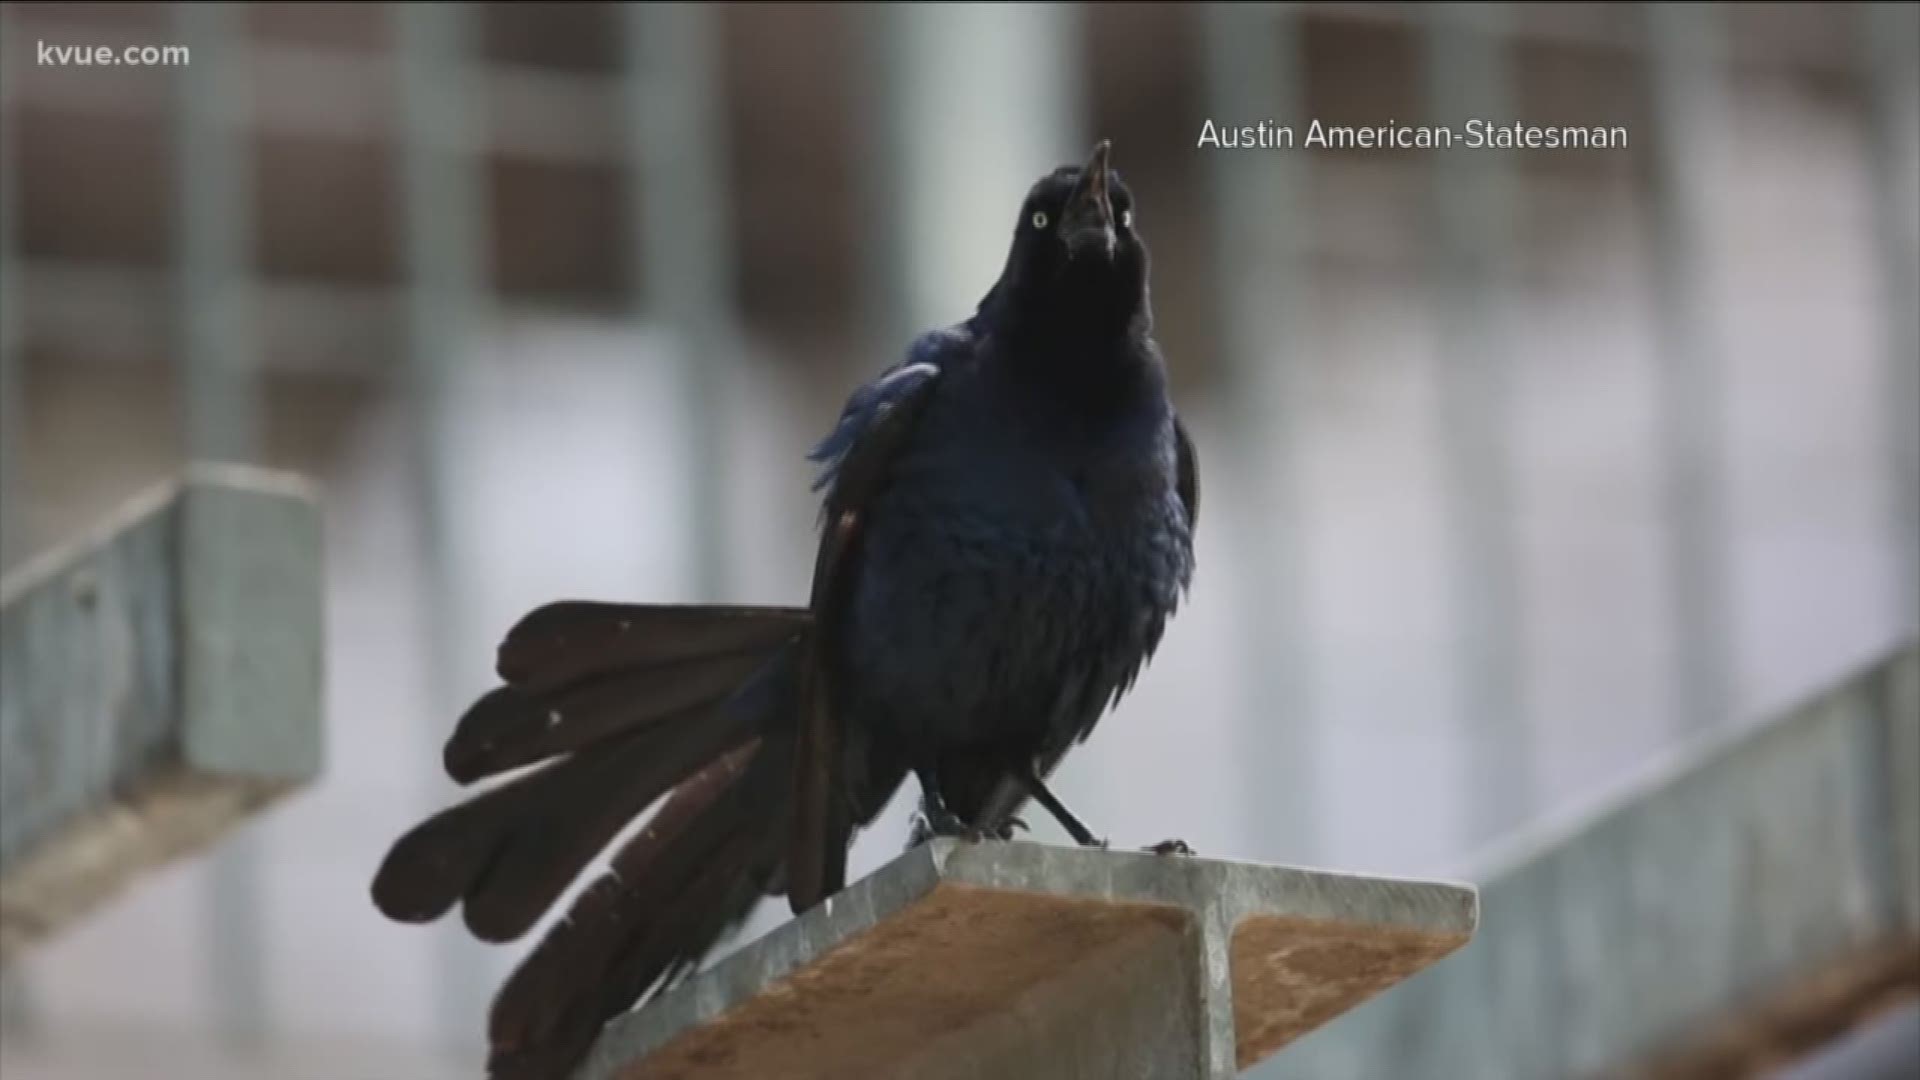 Research shows that humans and grackles have been living together since the 1400s in Mexico.